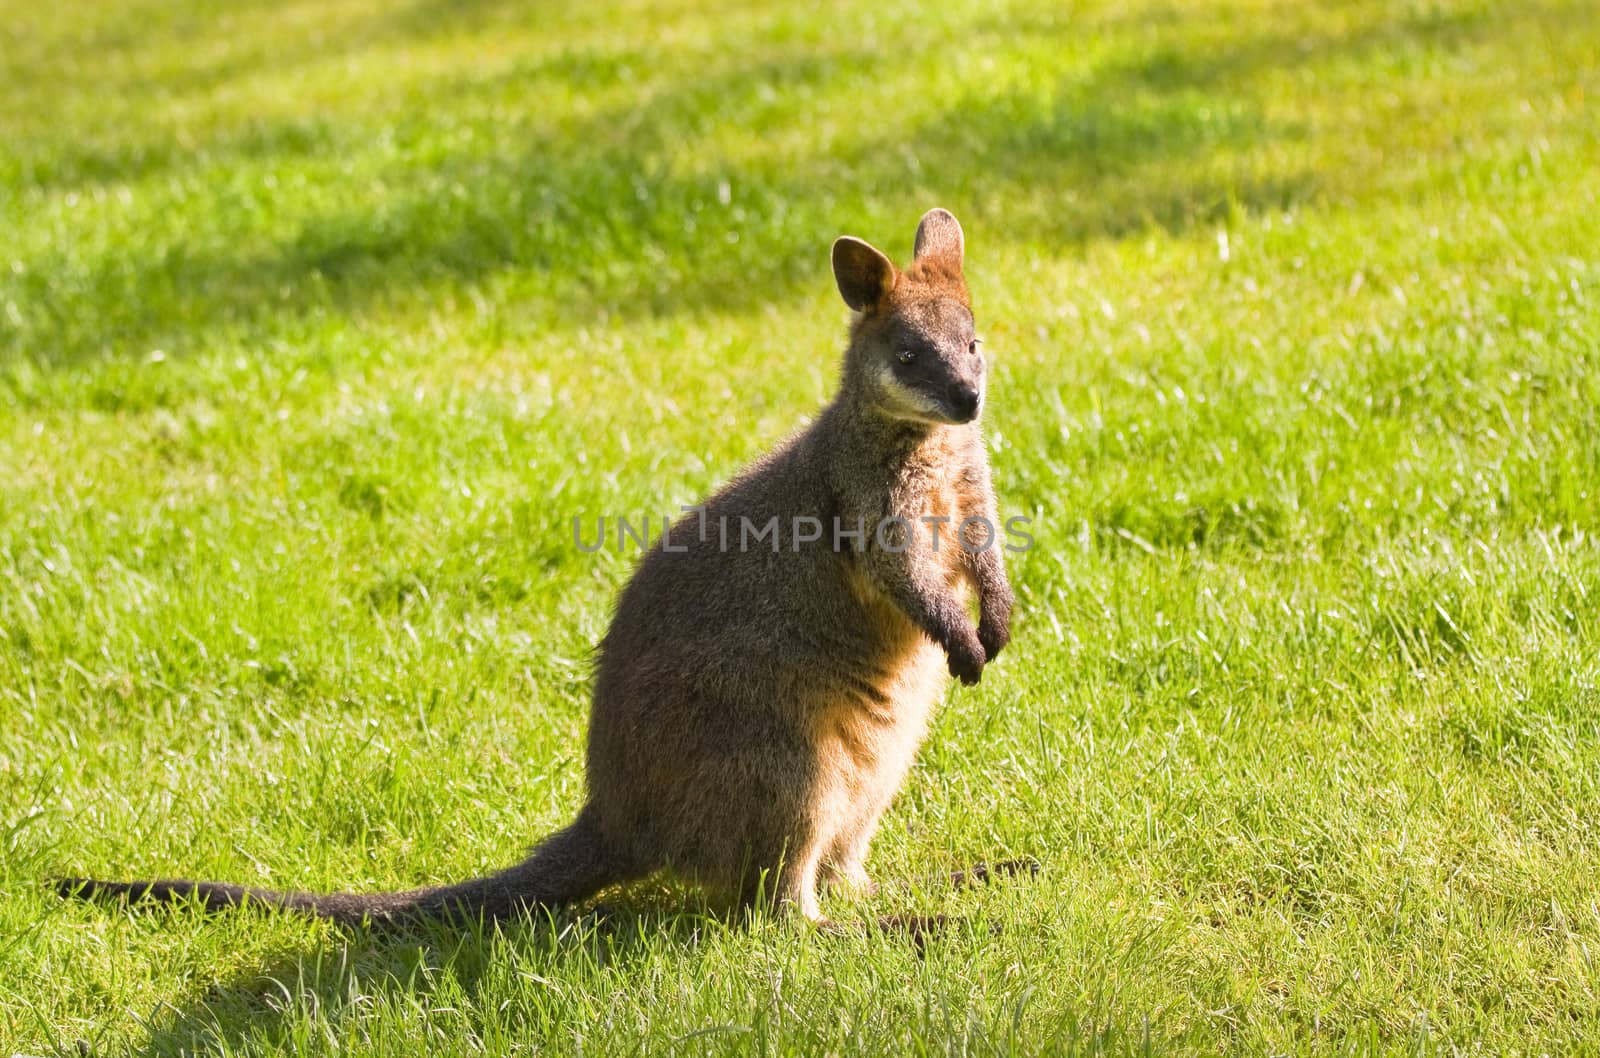 Swamp- or Black Wallaby on grassland by Colette